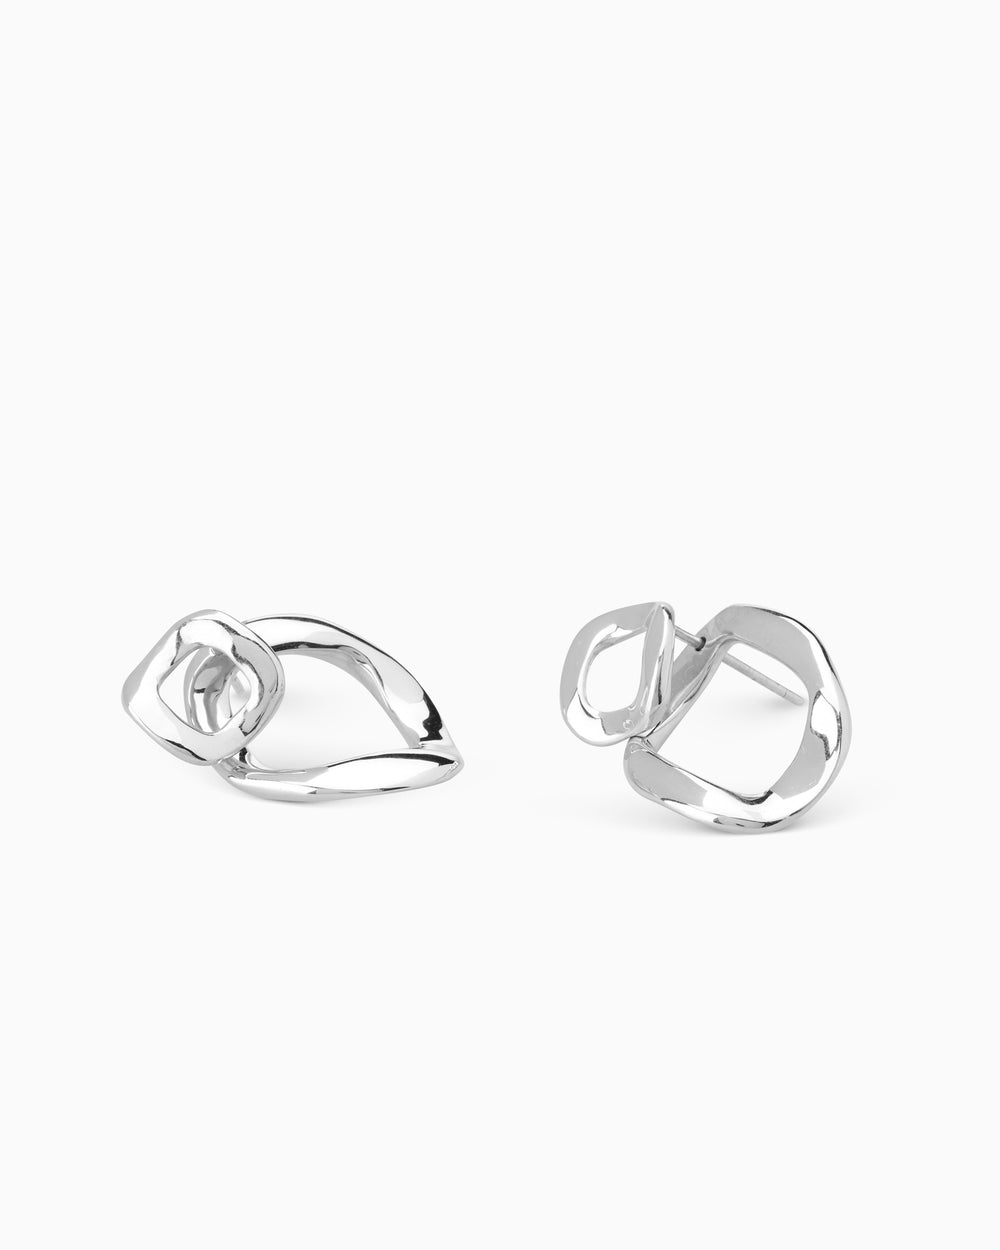 Curve Earrings Front and Back | Silver